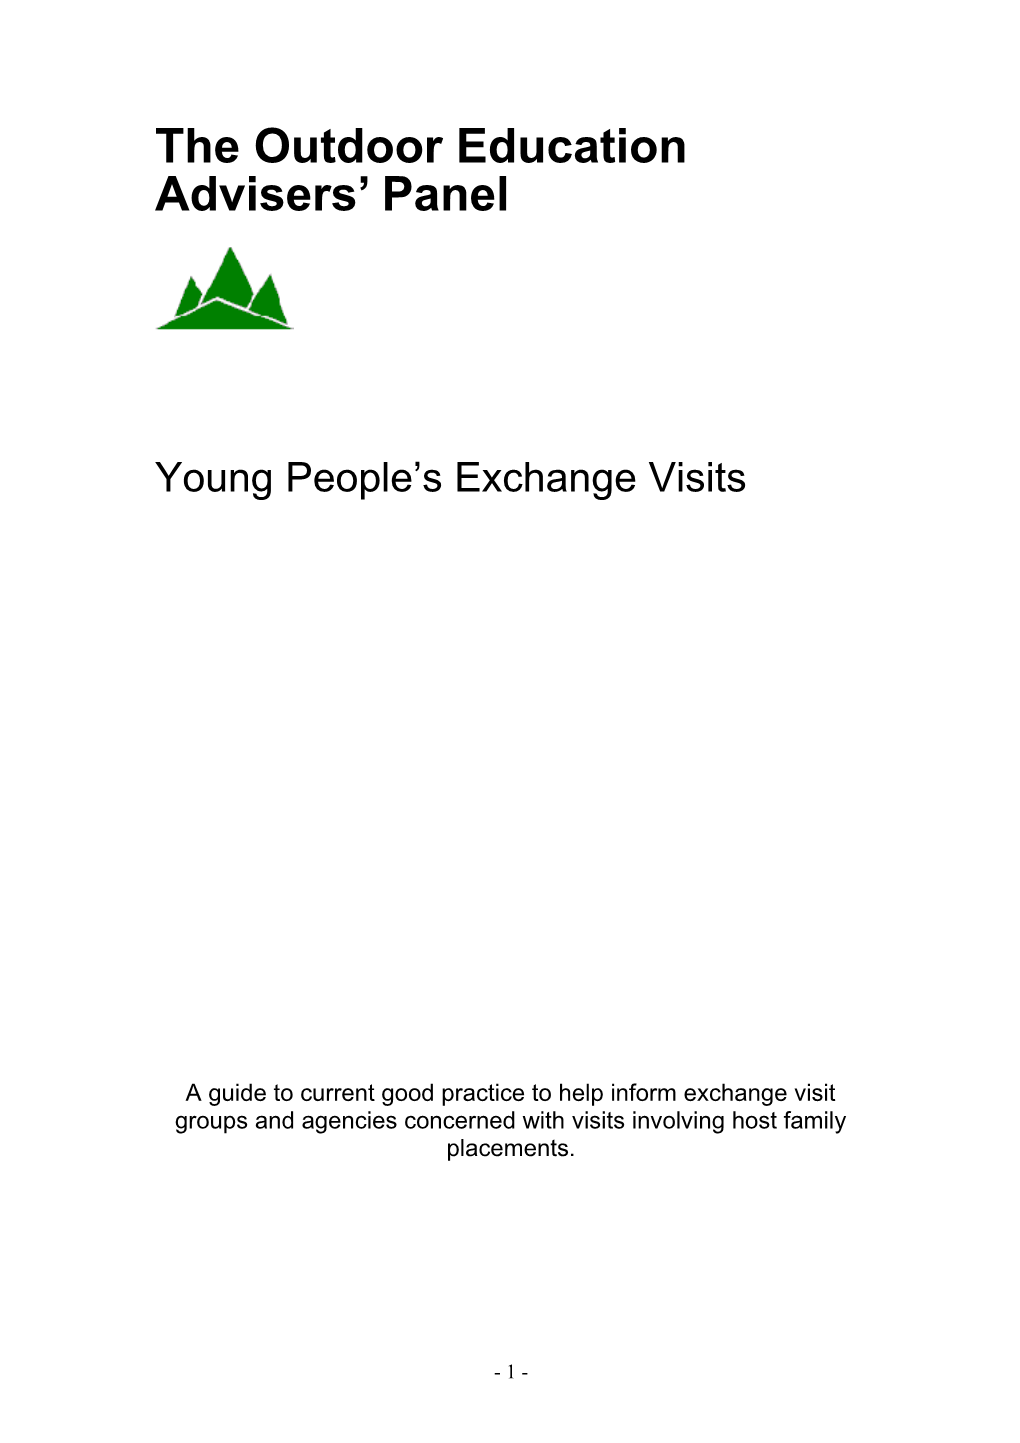 Young People's Exchange Visits